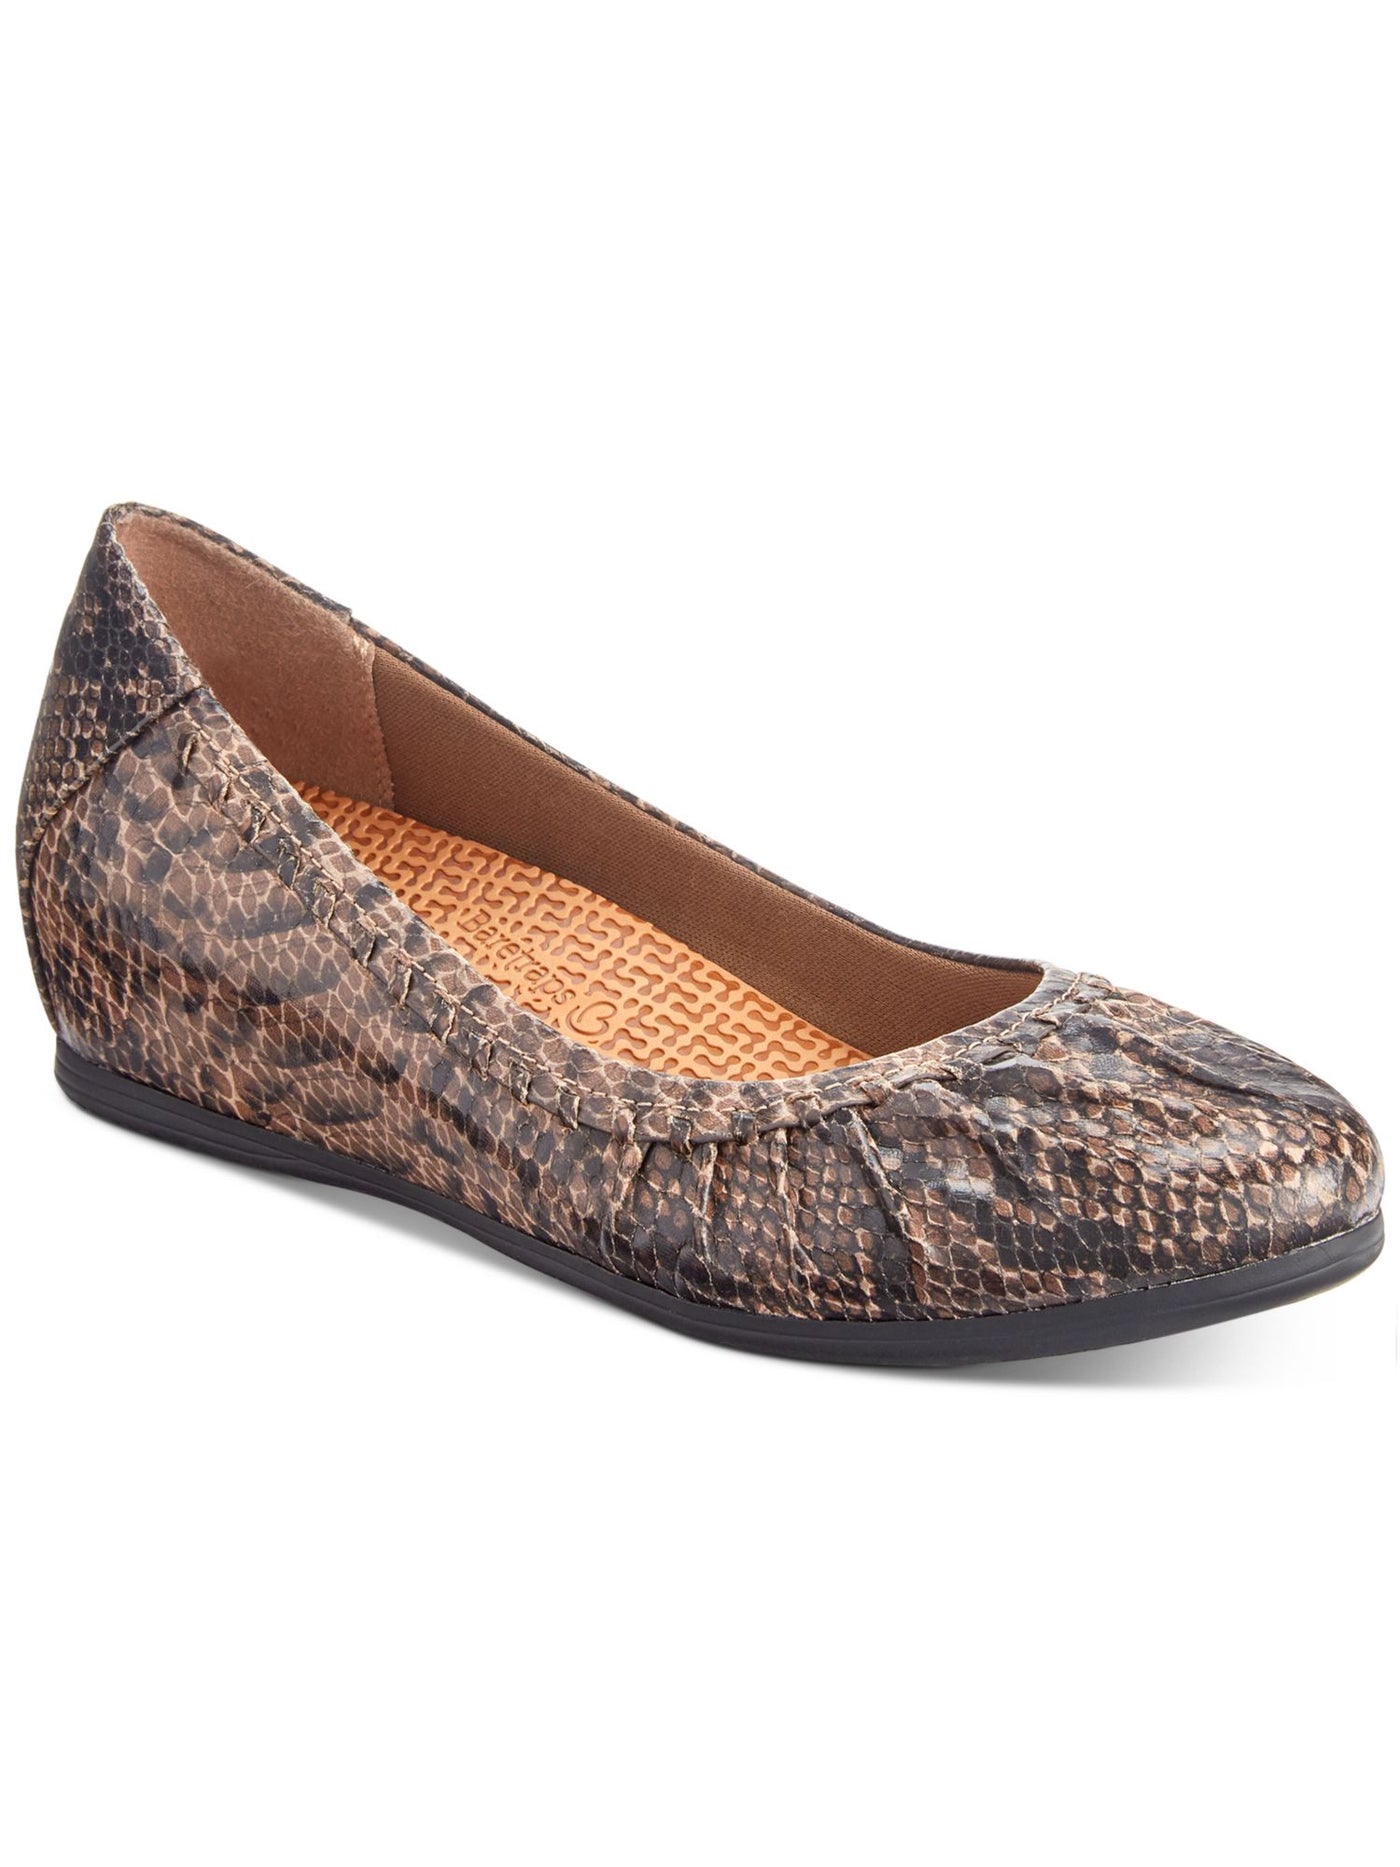 BARETRAPS Womens Brown Snakeskin Ruched Cushioned Hidden Heel Norma Pointy Toe Wedge Slip On Flats Shoes 5 M